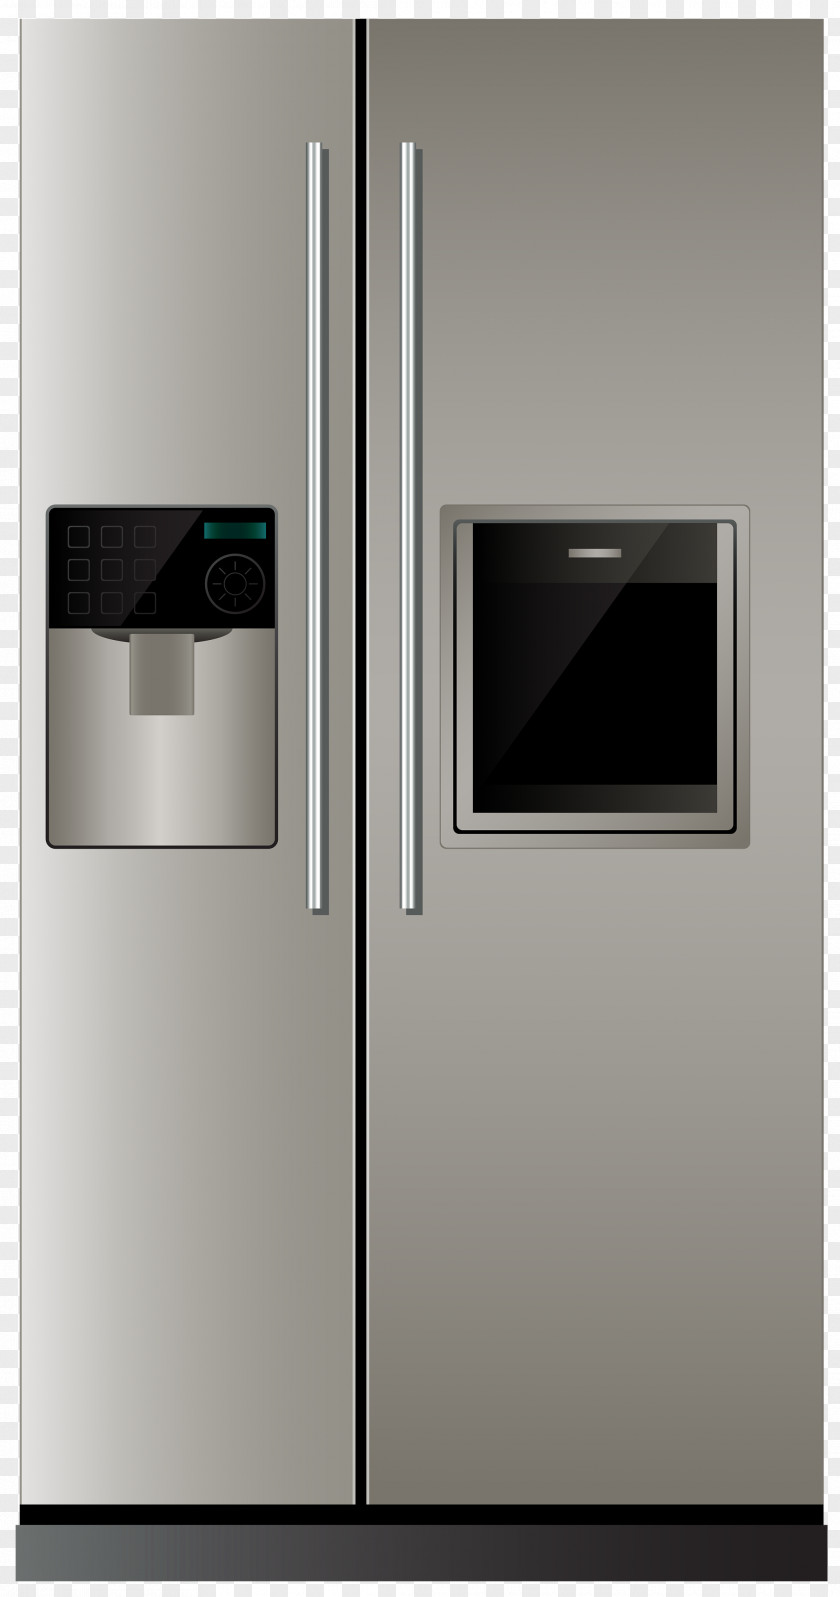 Refrigerator Home Appliance Clip Art PNG